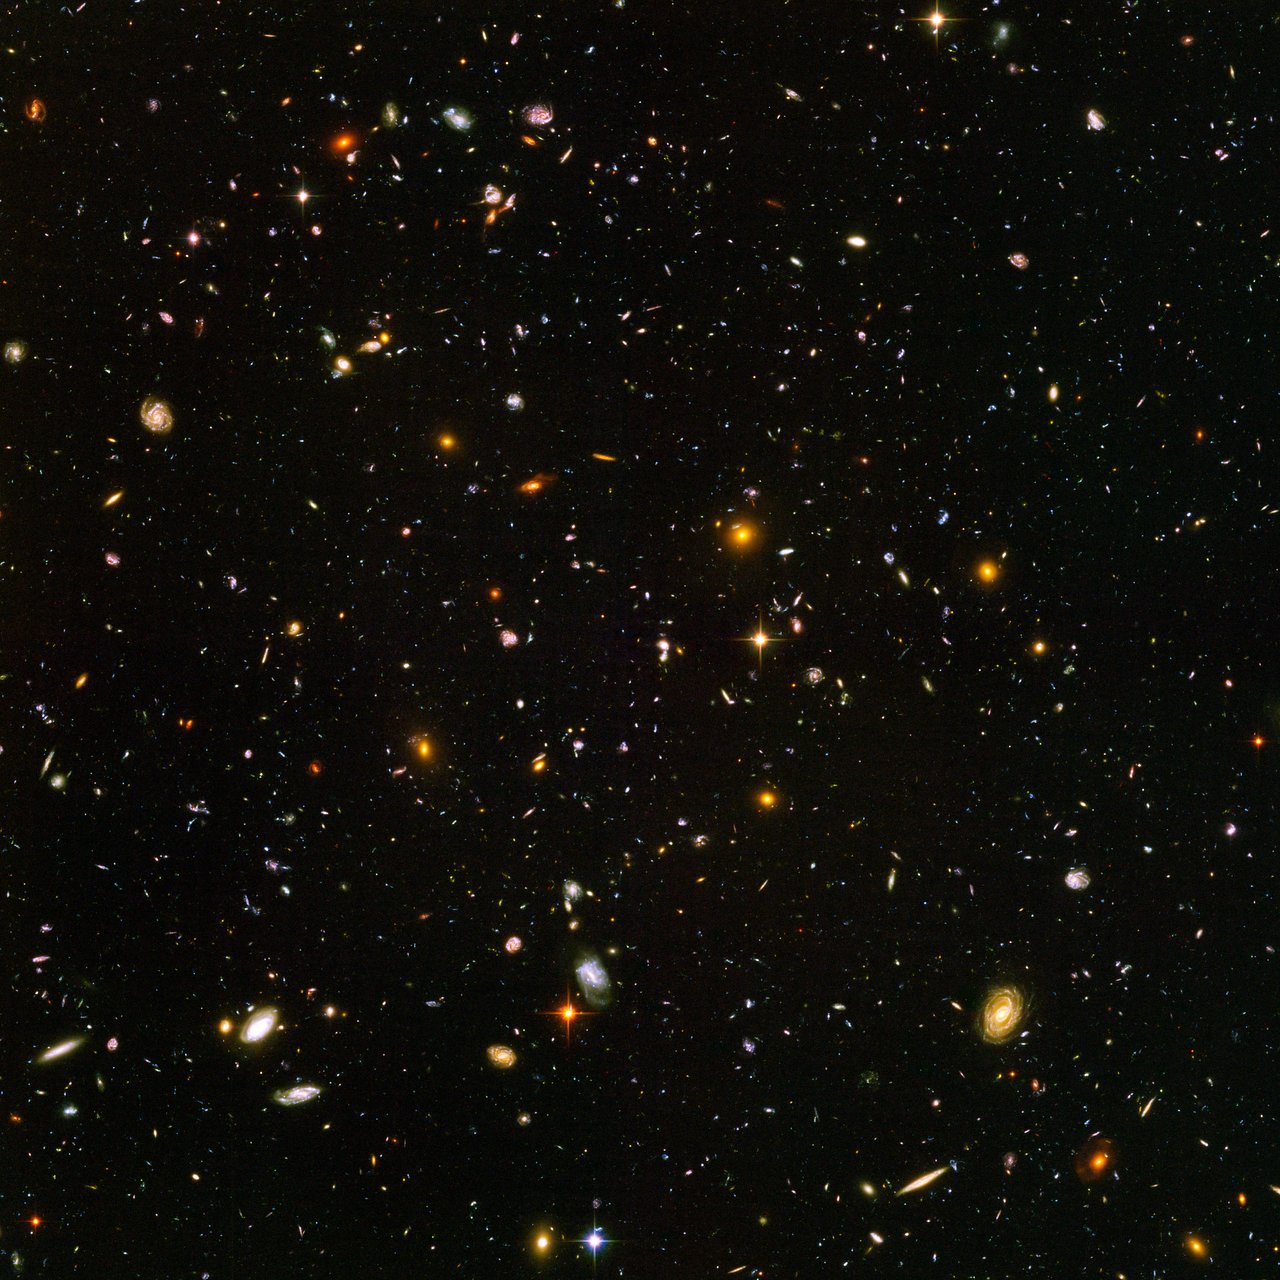 The Hubble Ultra Deep Field is a snapshot of about 10,000 galaxies in a tiny patch of sky, taken by NASA’s Hubble